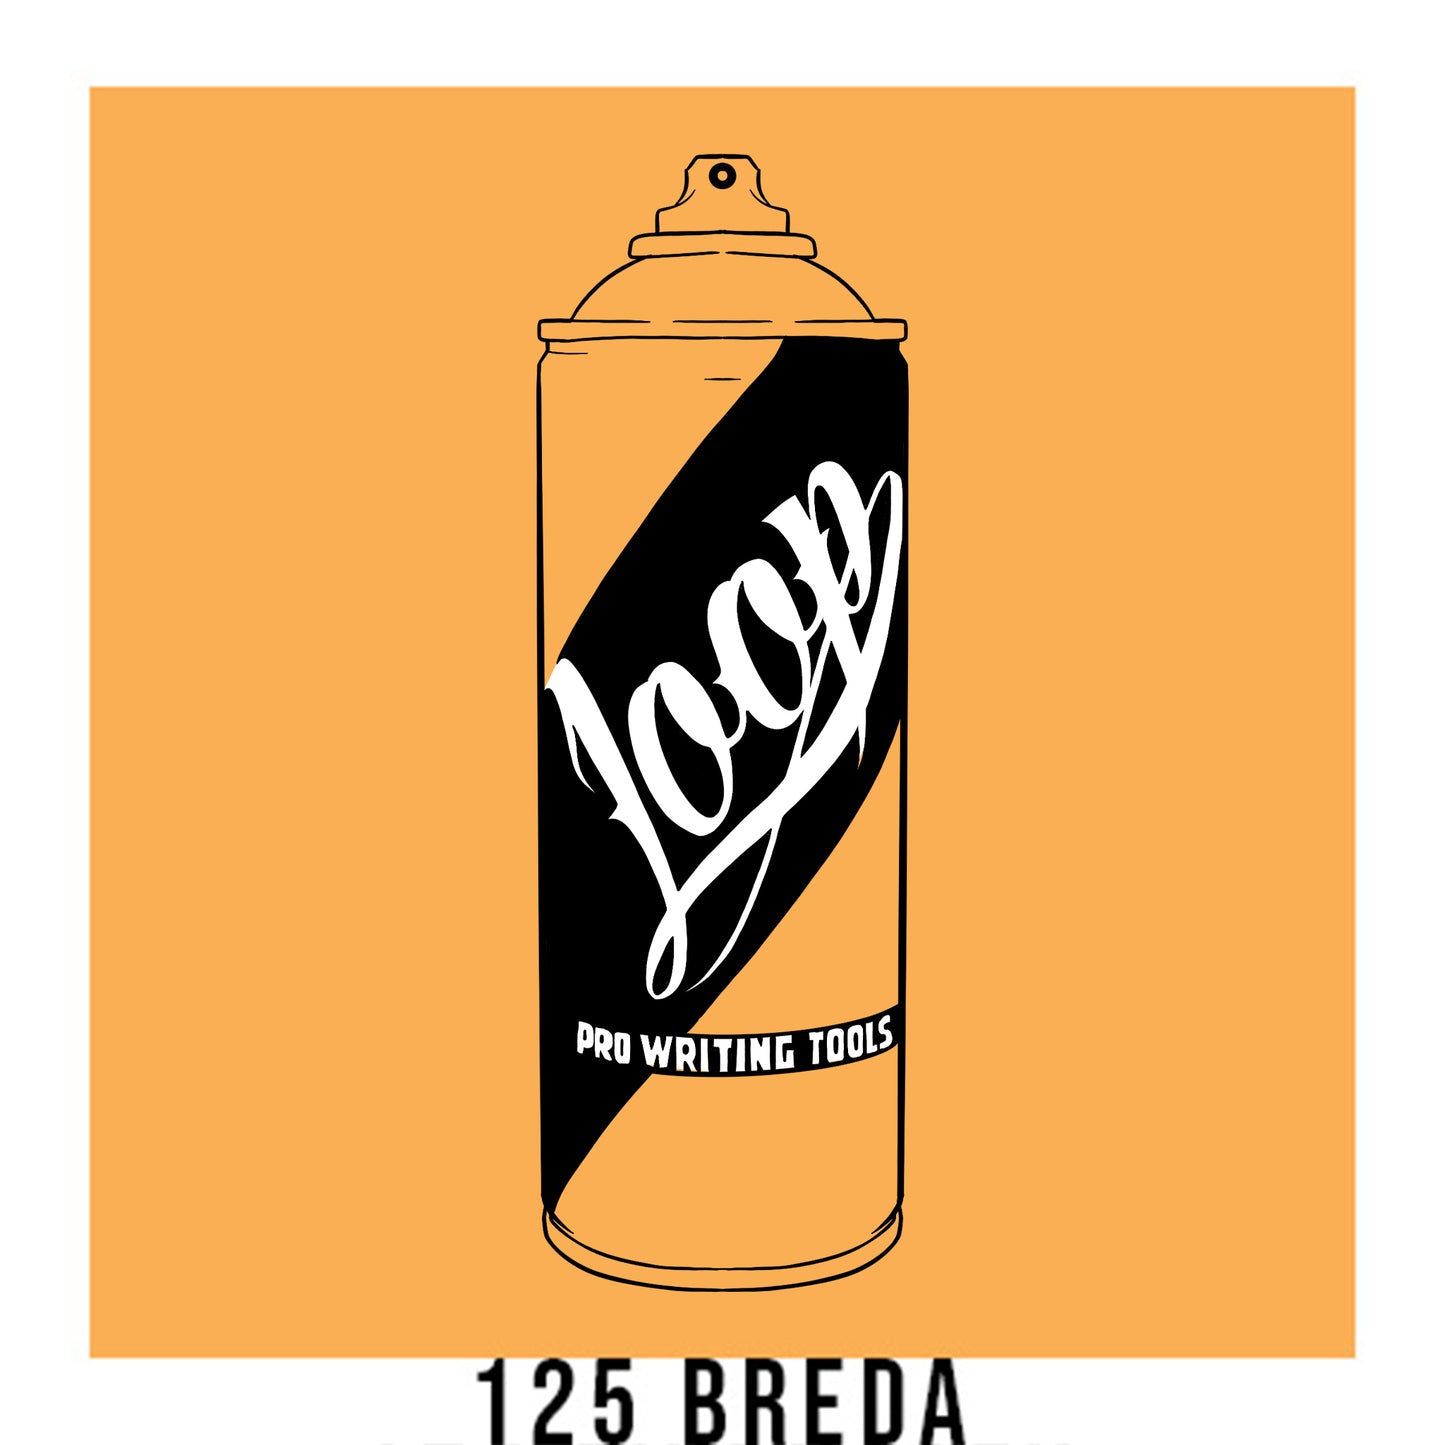 A black outline drawing of a cream orange spray paint can with the word "Loop" written on the face in script. The background is a color swatch of the same cream orange with a white border with the words "125 breda" at the bottom.